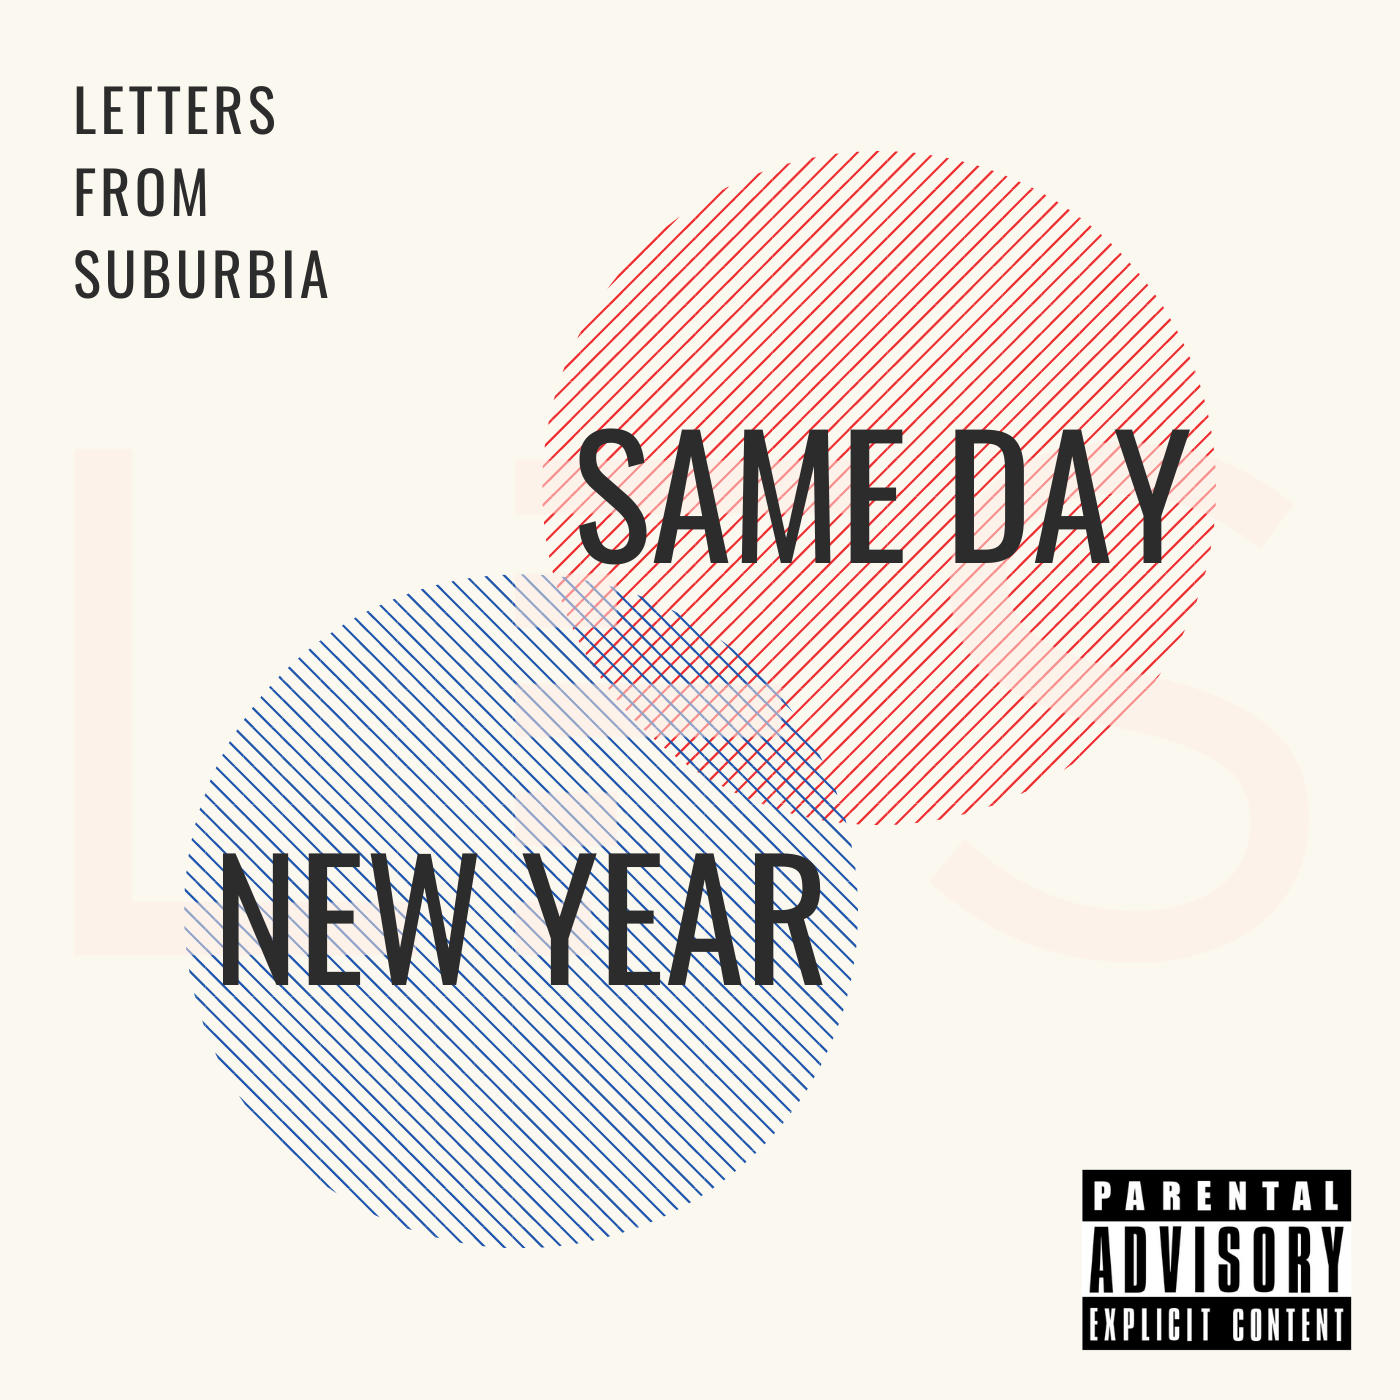 Letters from Suburbia - New Year, Same Day